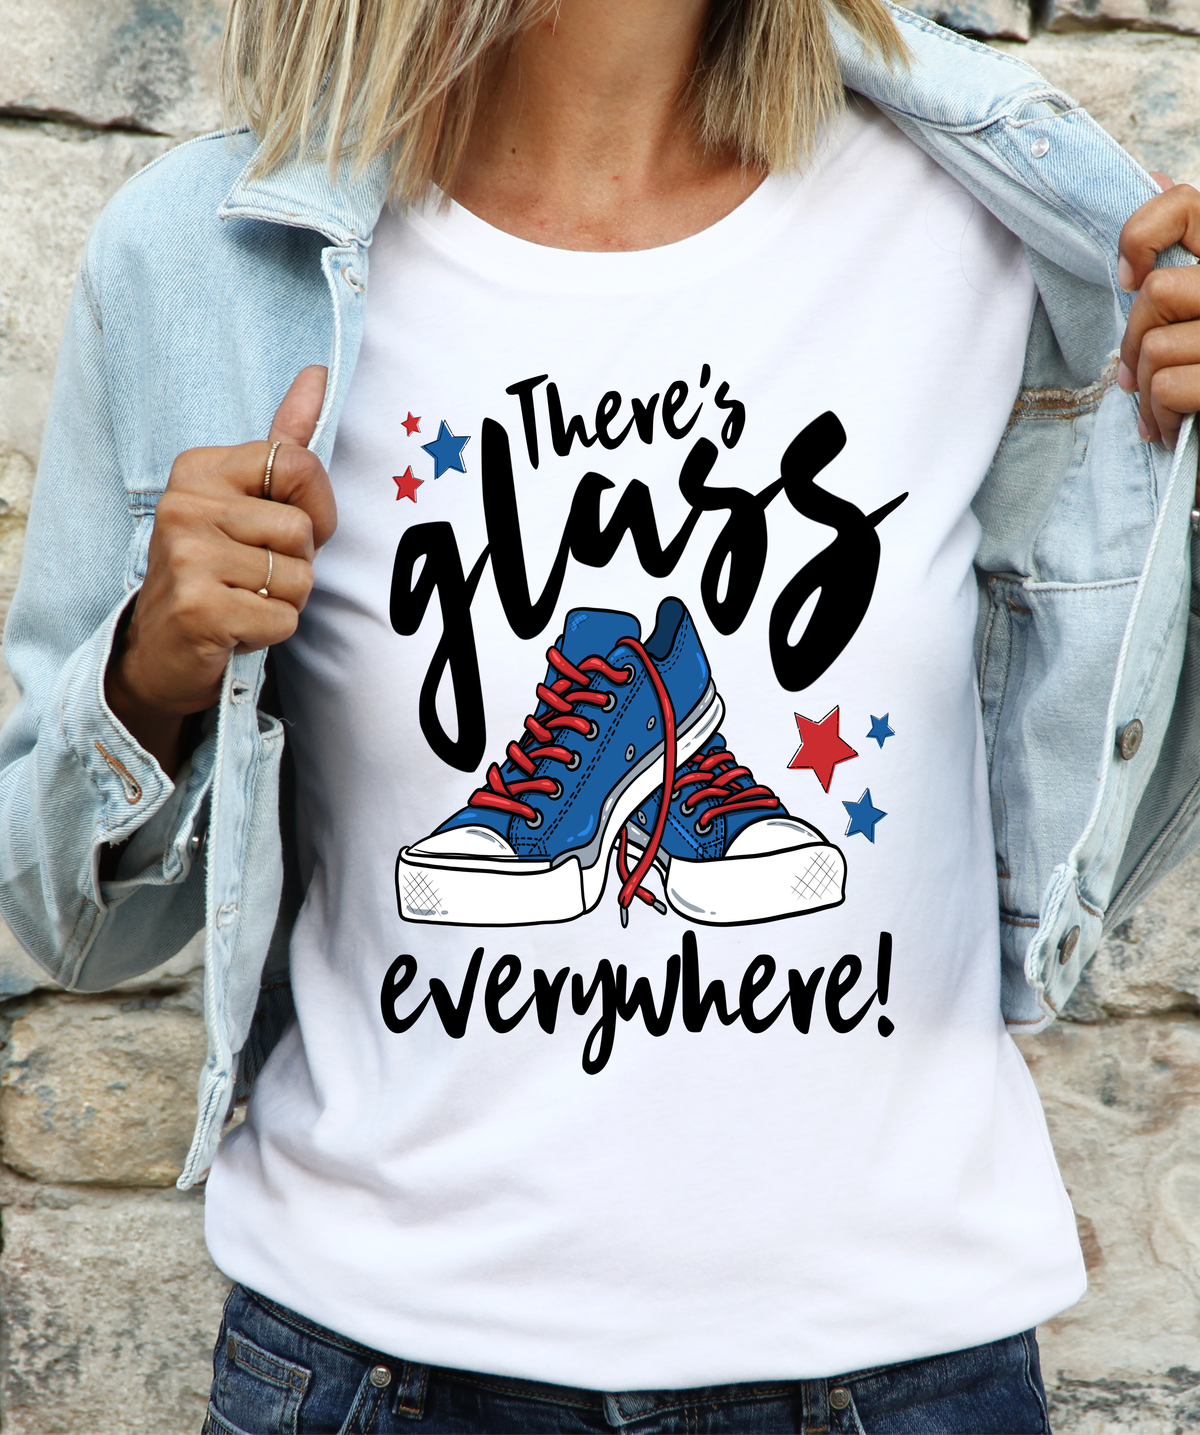 There's glass everywhere Chucks  Adult size  DTF TRANSFERPRINT TO ORDER